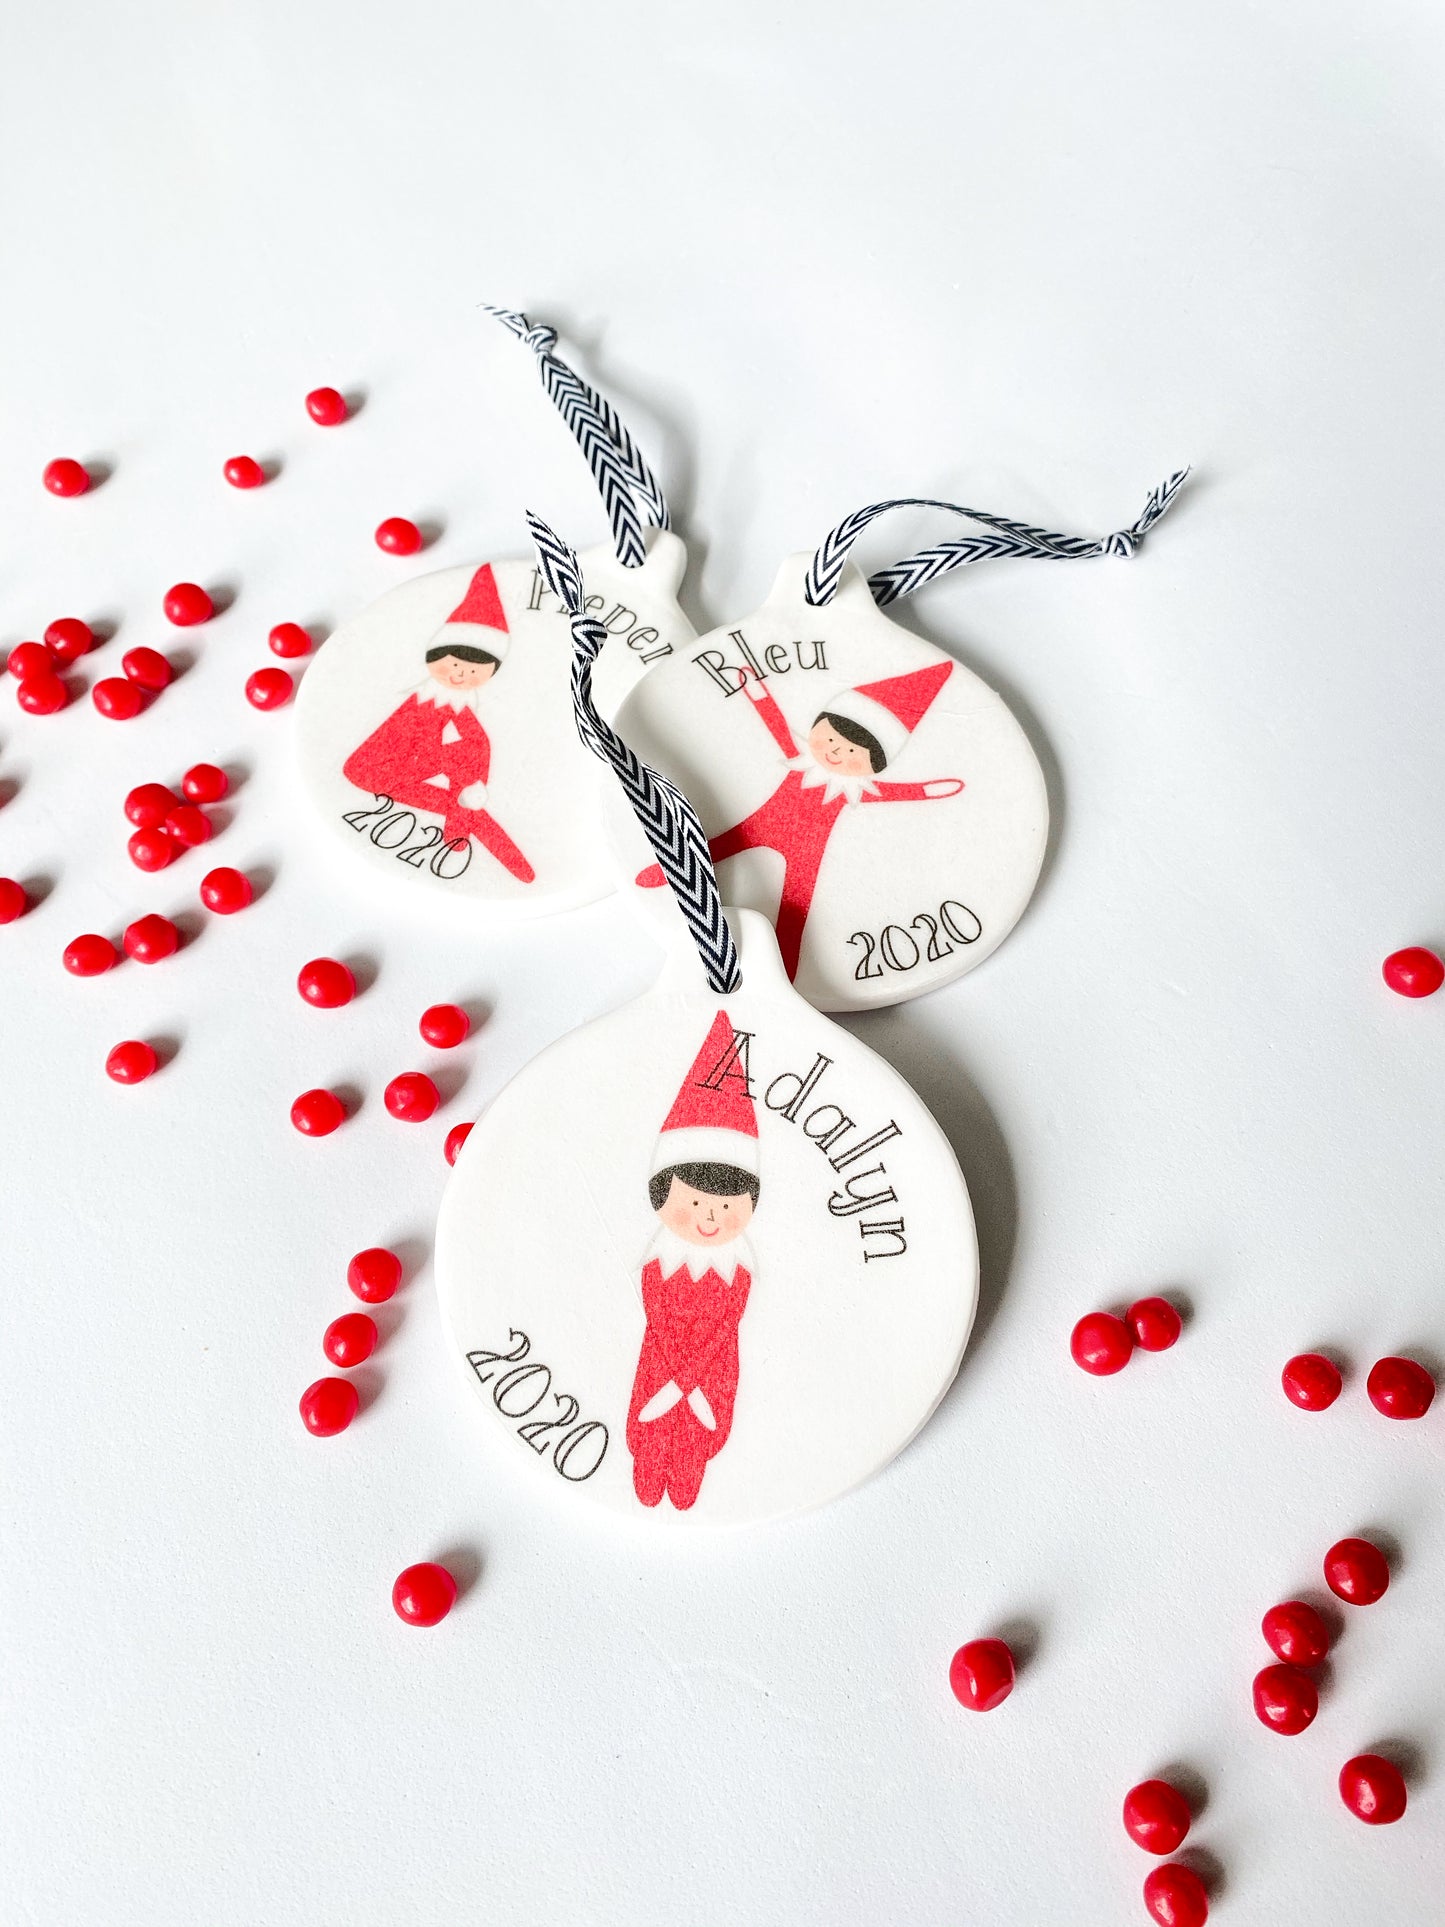 ELF ON THE PERSONALIZED ORNAMENT